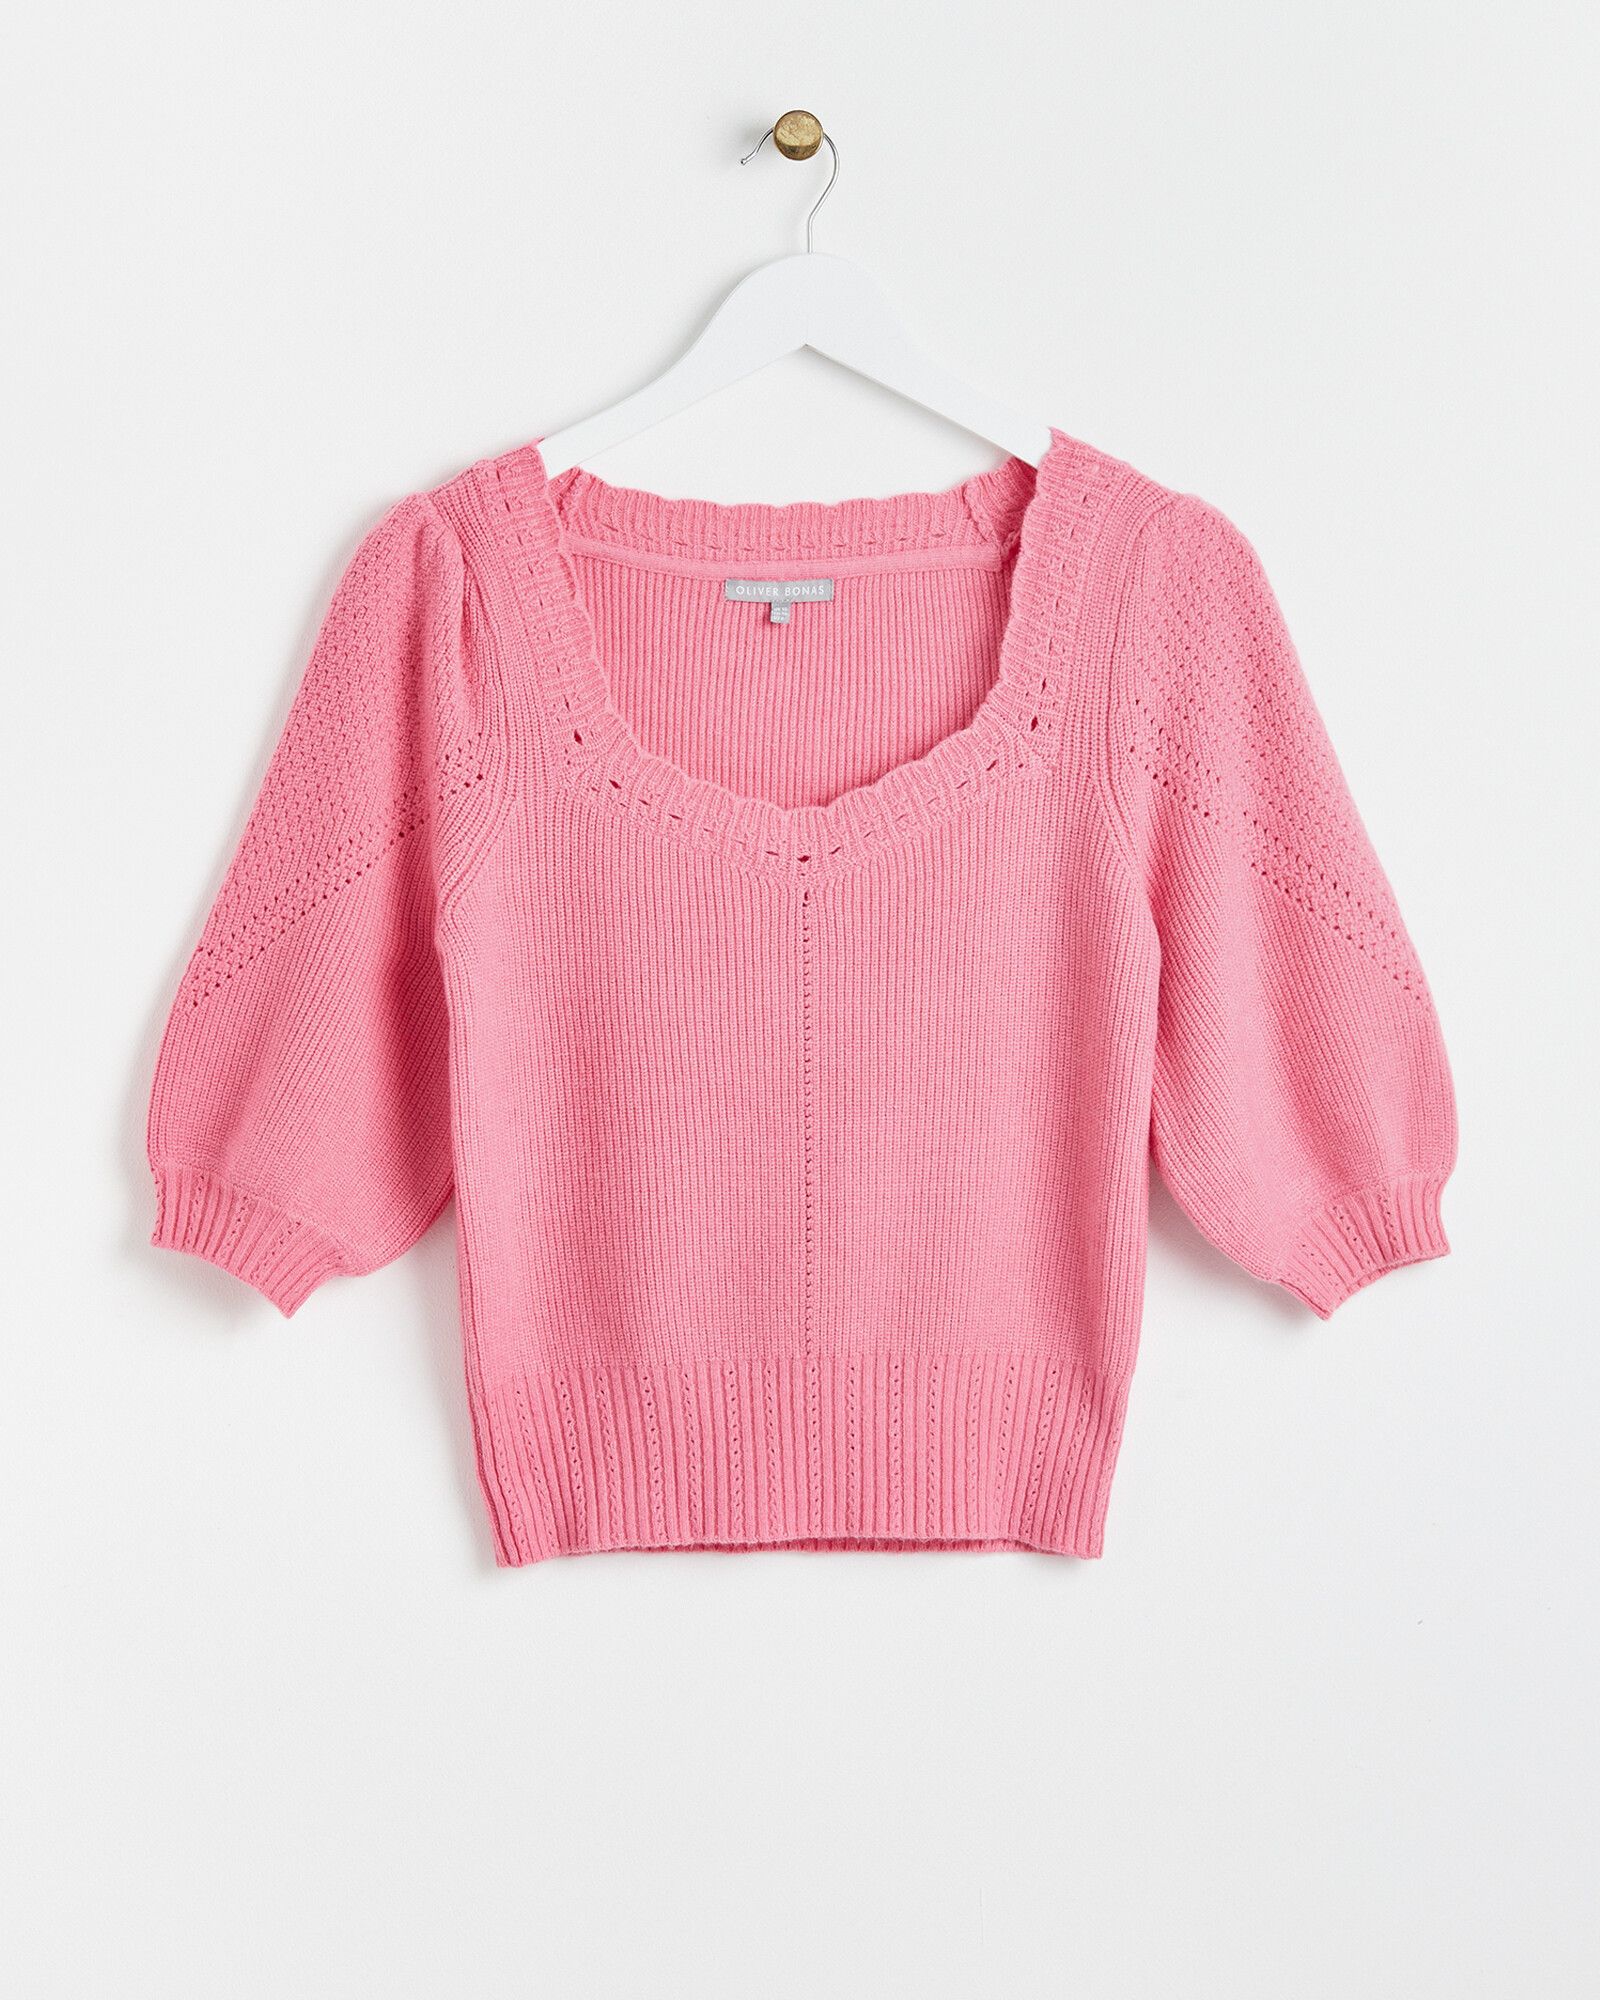 Scalloped Pink Knitted Top | Oliver Bonas